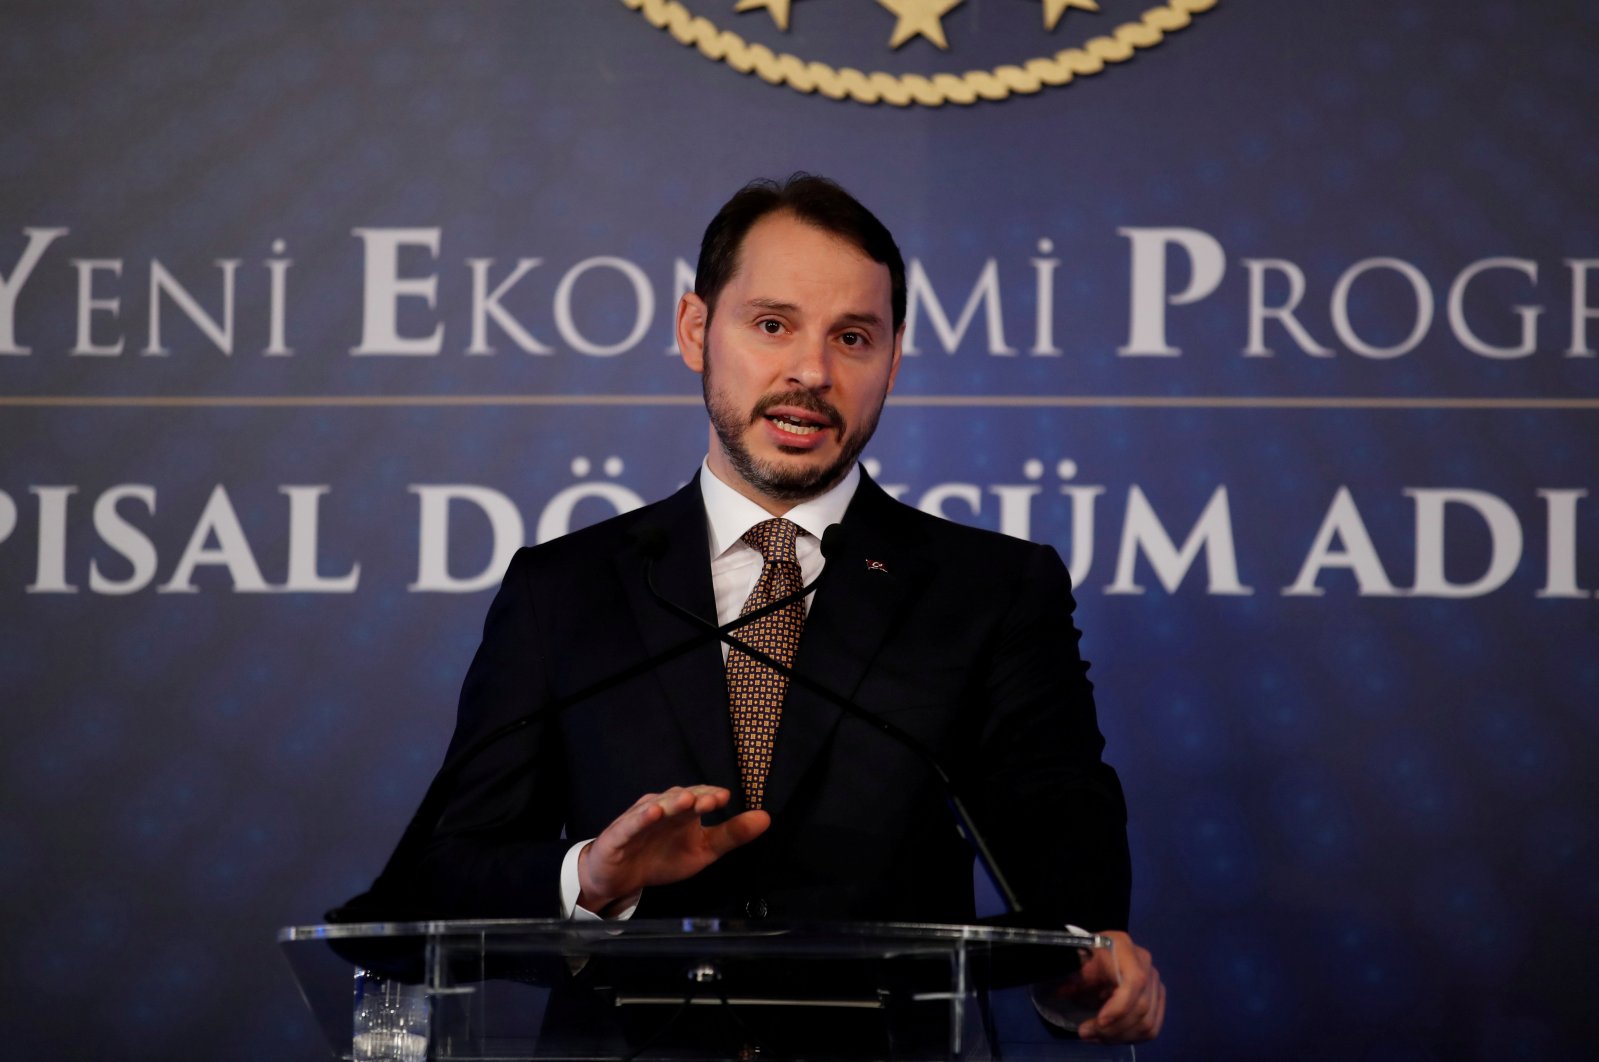 Treasury and Finance Minister Berat Albayrak attends a news conference in Istanbul, Turkey, April 10, 2019. (Reuters Photo)